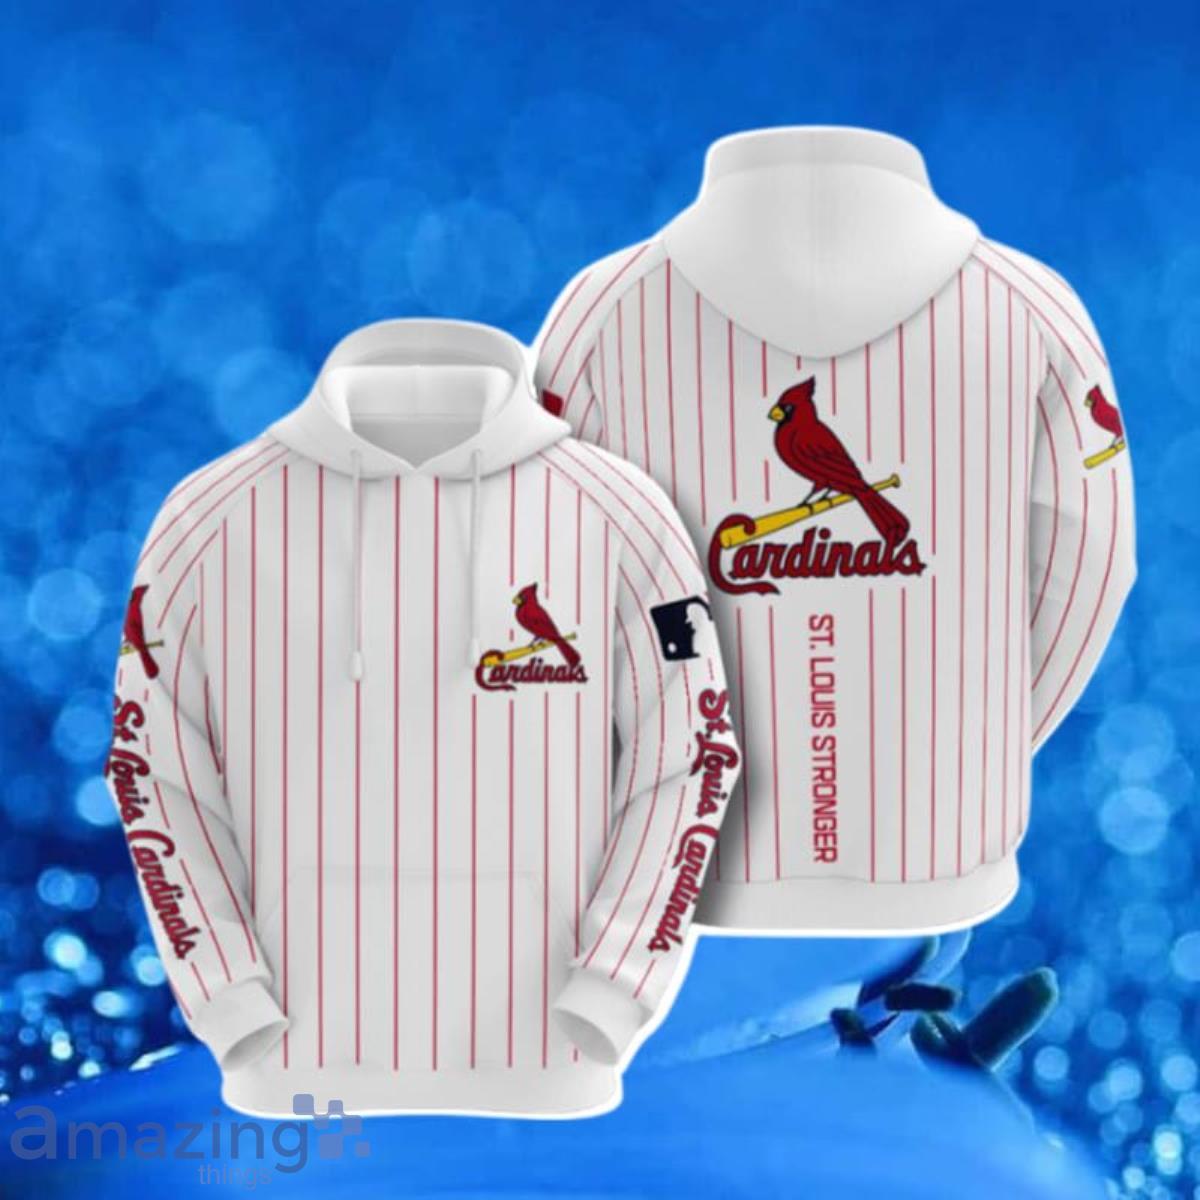 Mens St Louis Cardinals Hoodie 3D Tree Covered Custom St Louis Cardinals  Gift - Personalized Gifts: Family, Sports, Occasions, Trending